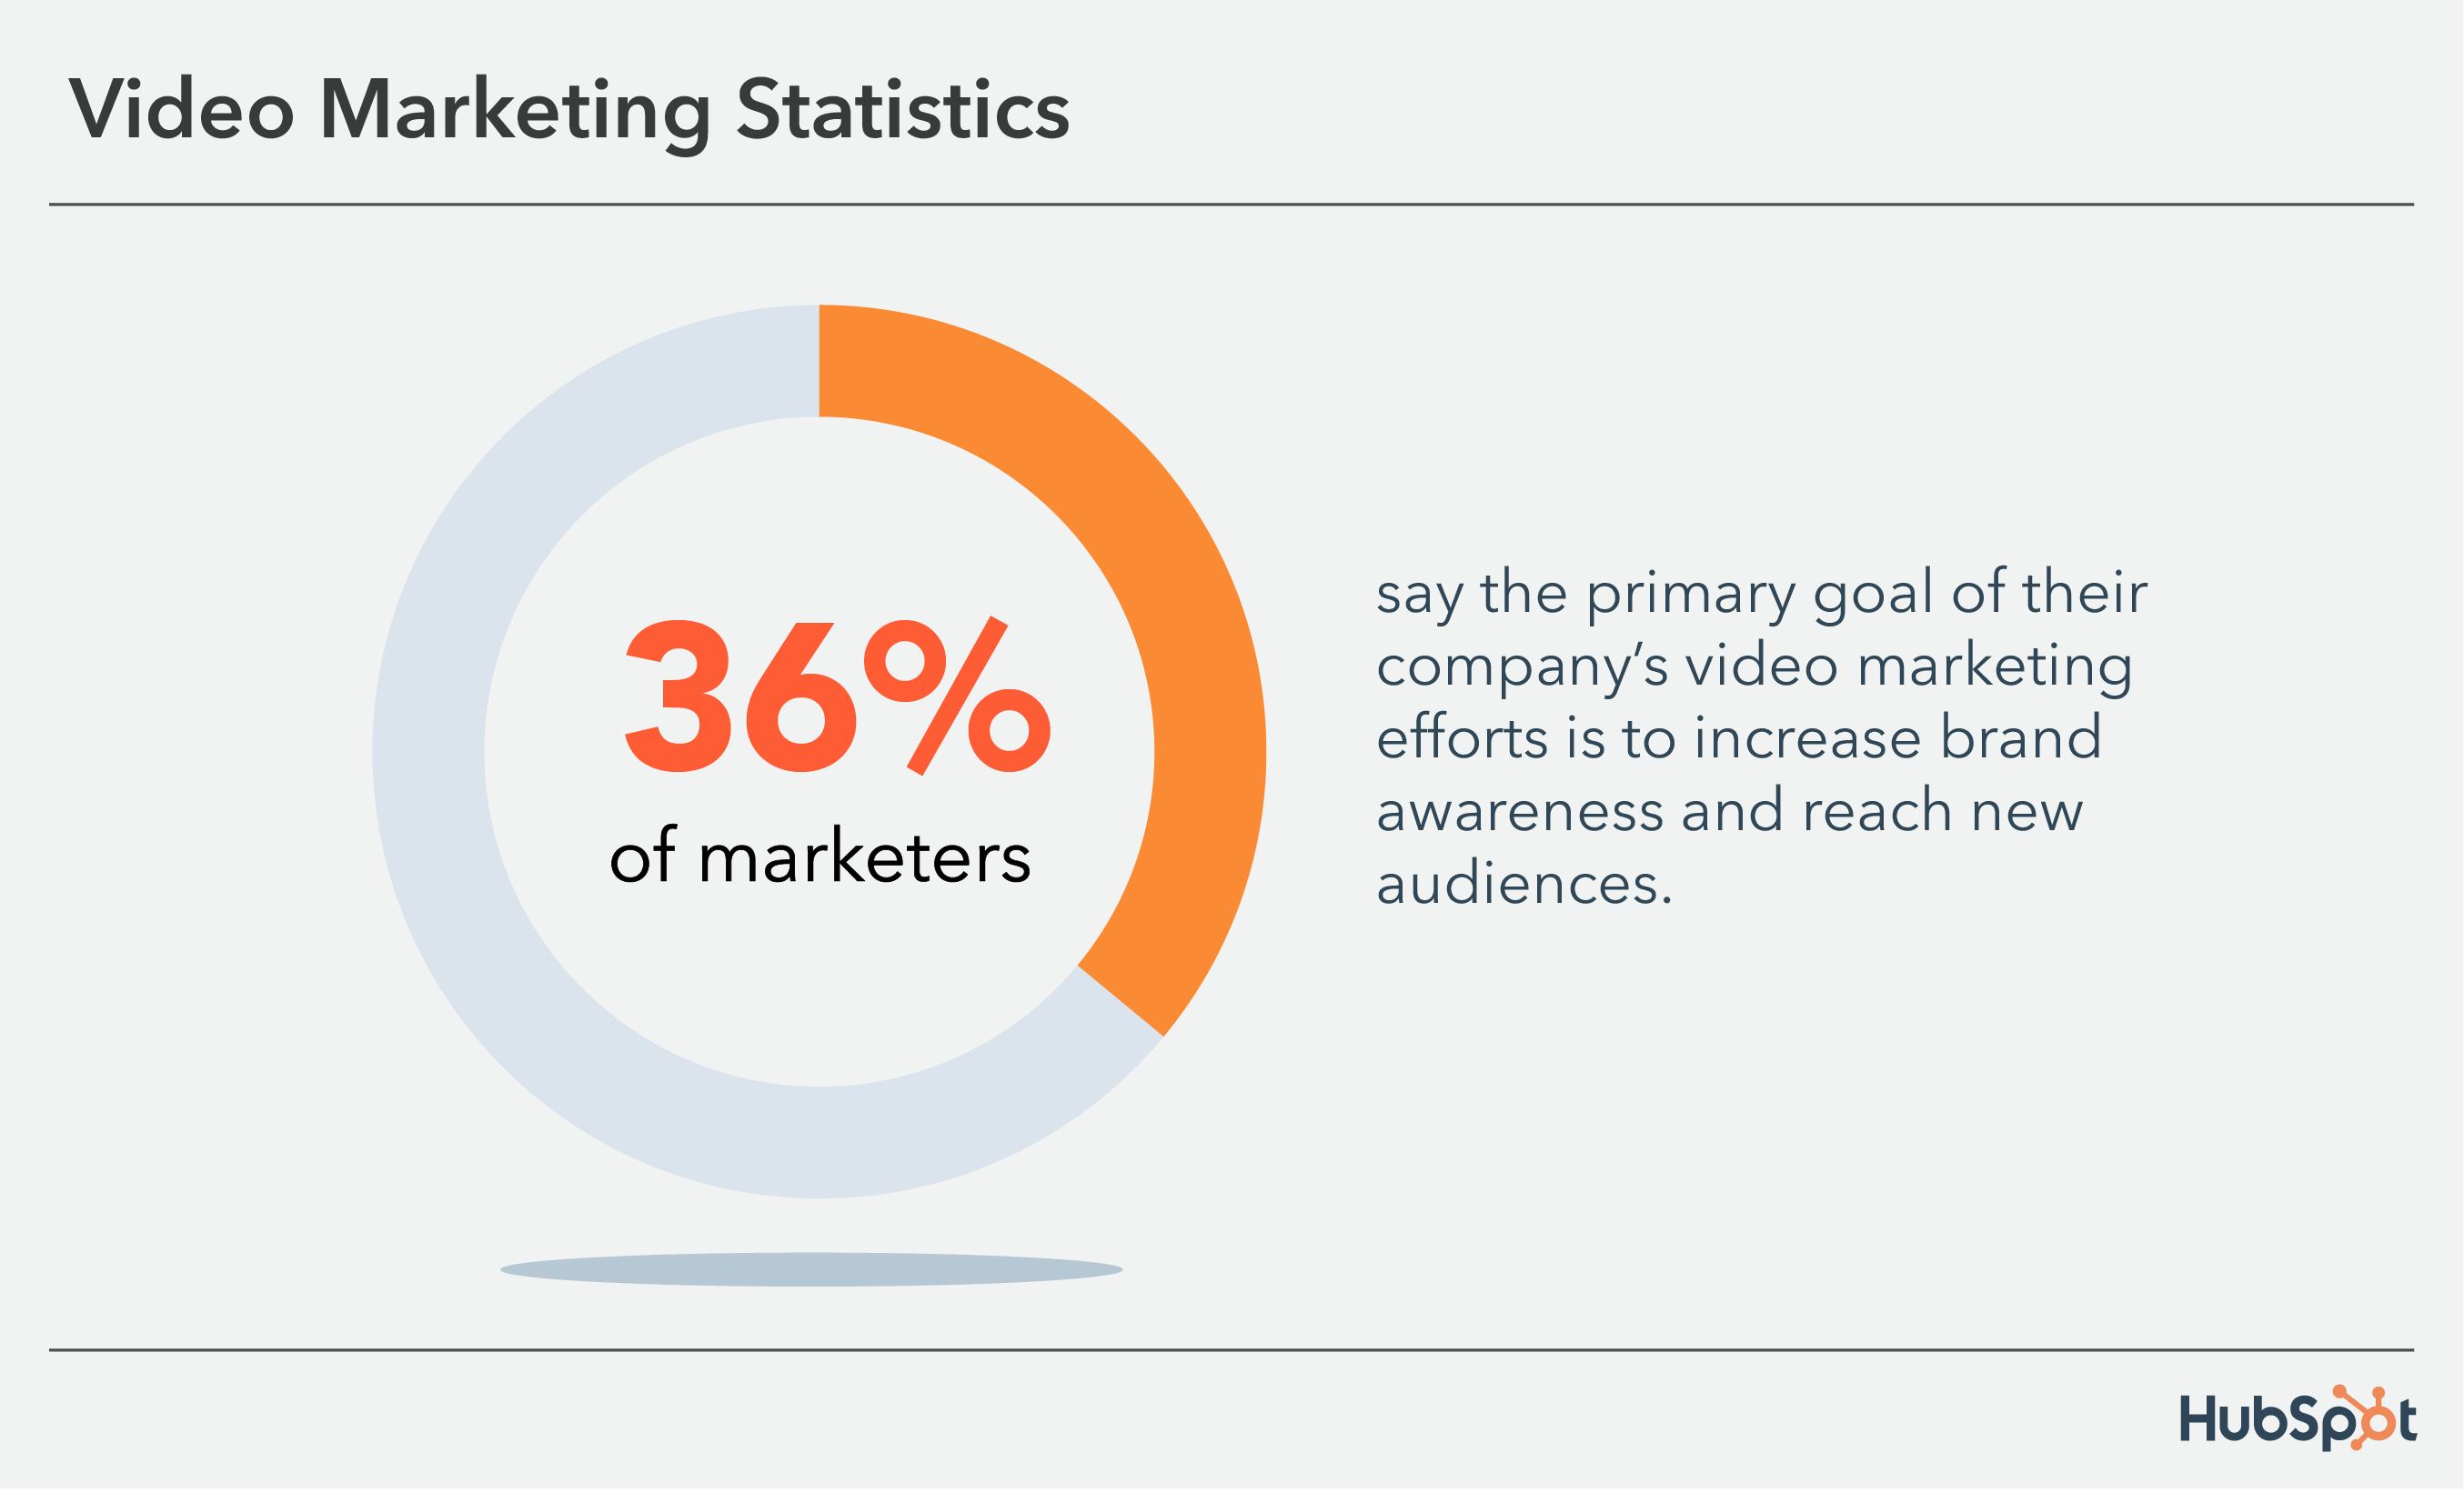 video marketing statistics: 36% of marketers use video marketing to increase brand awareness